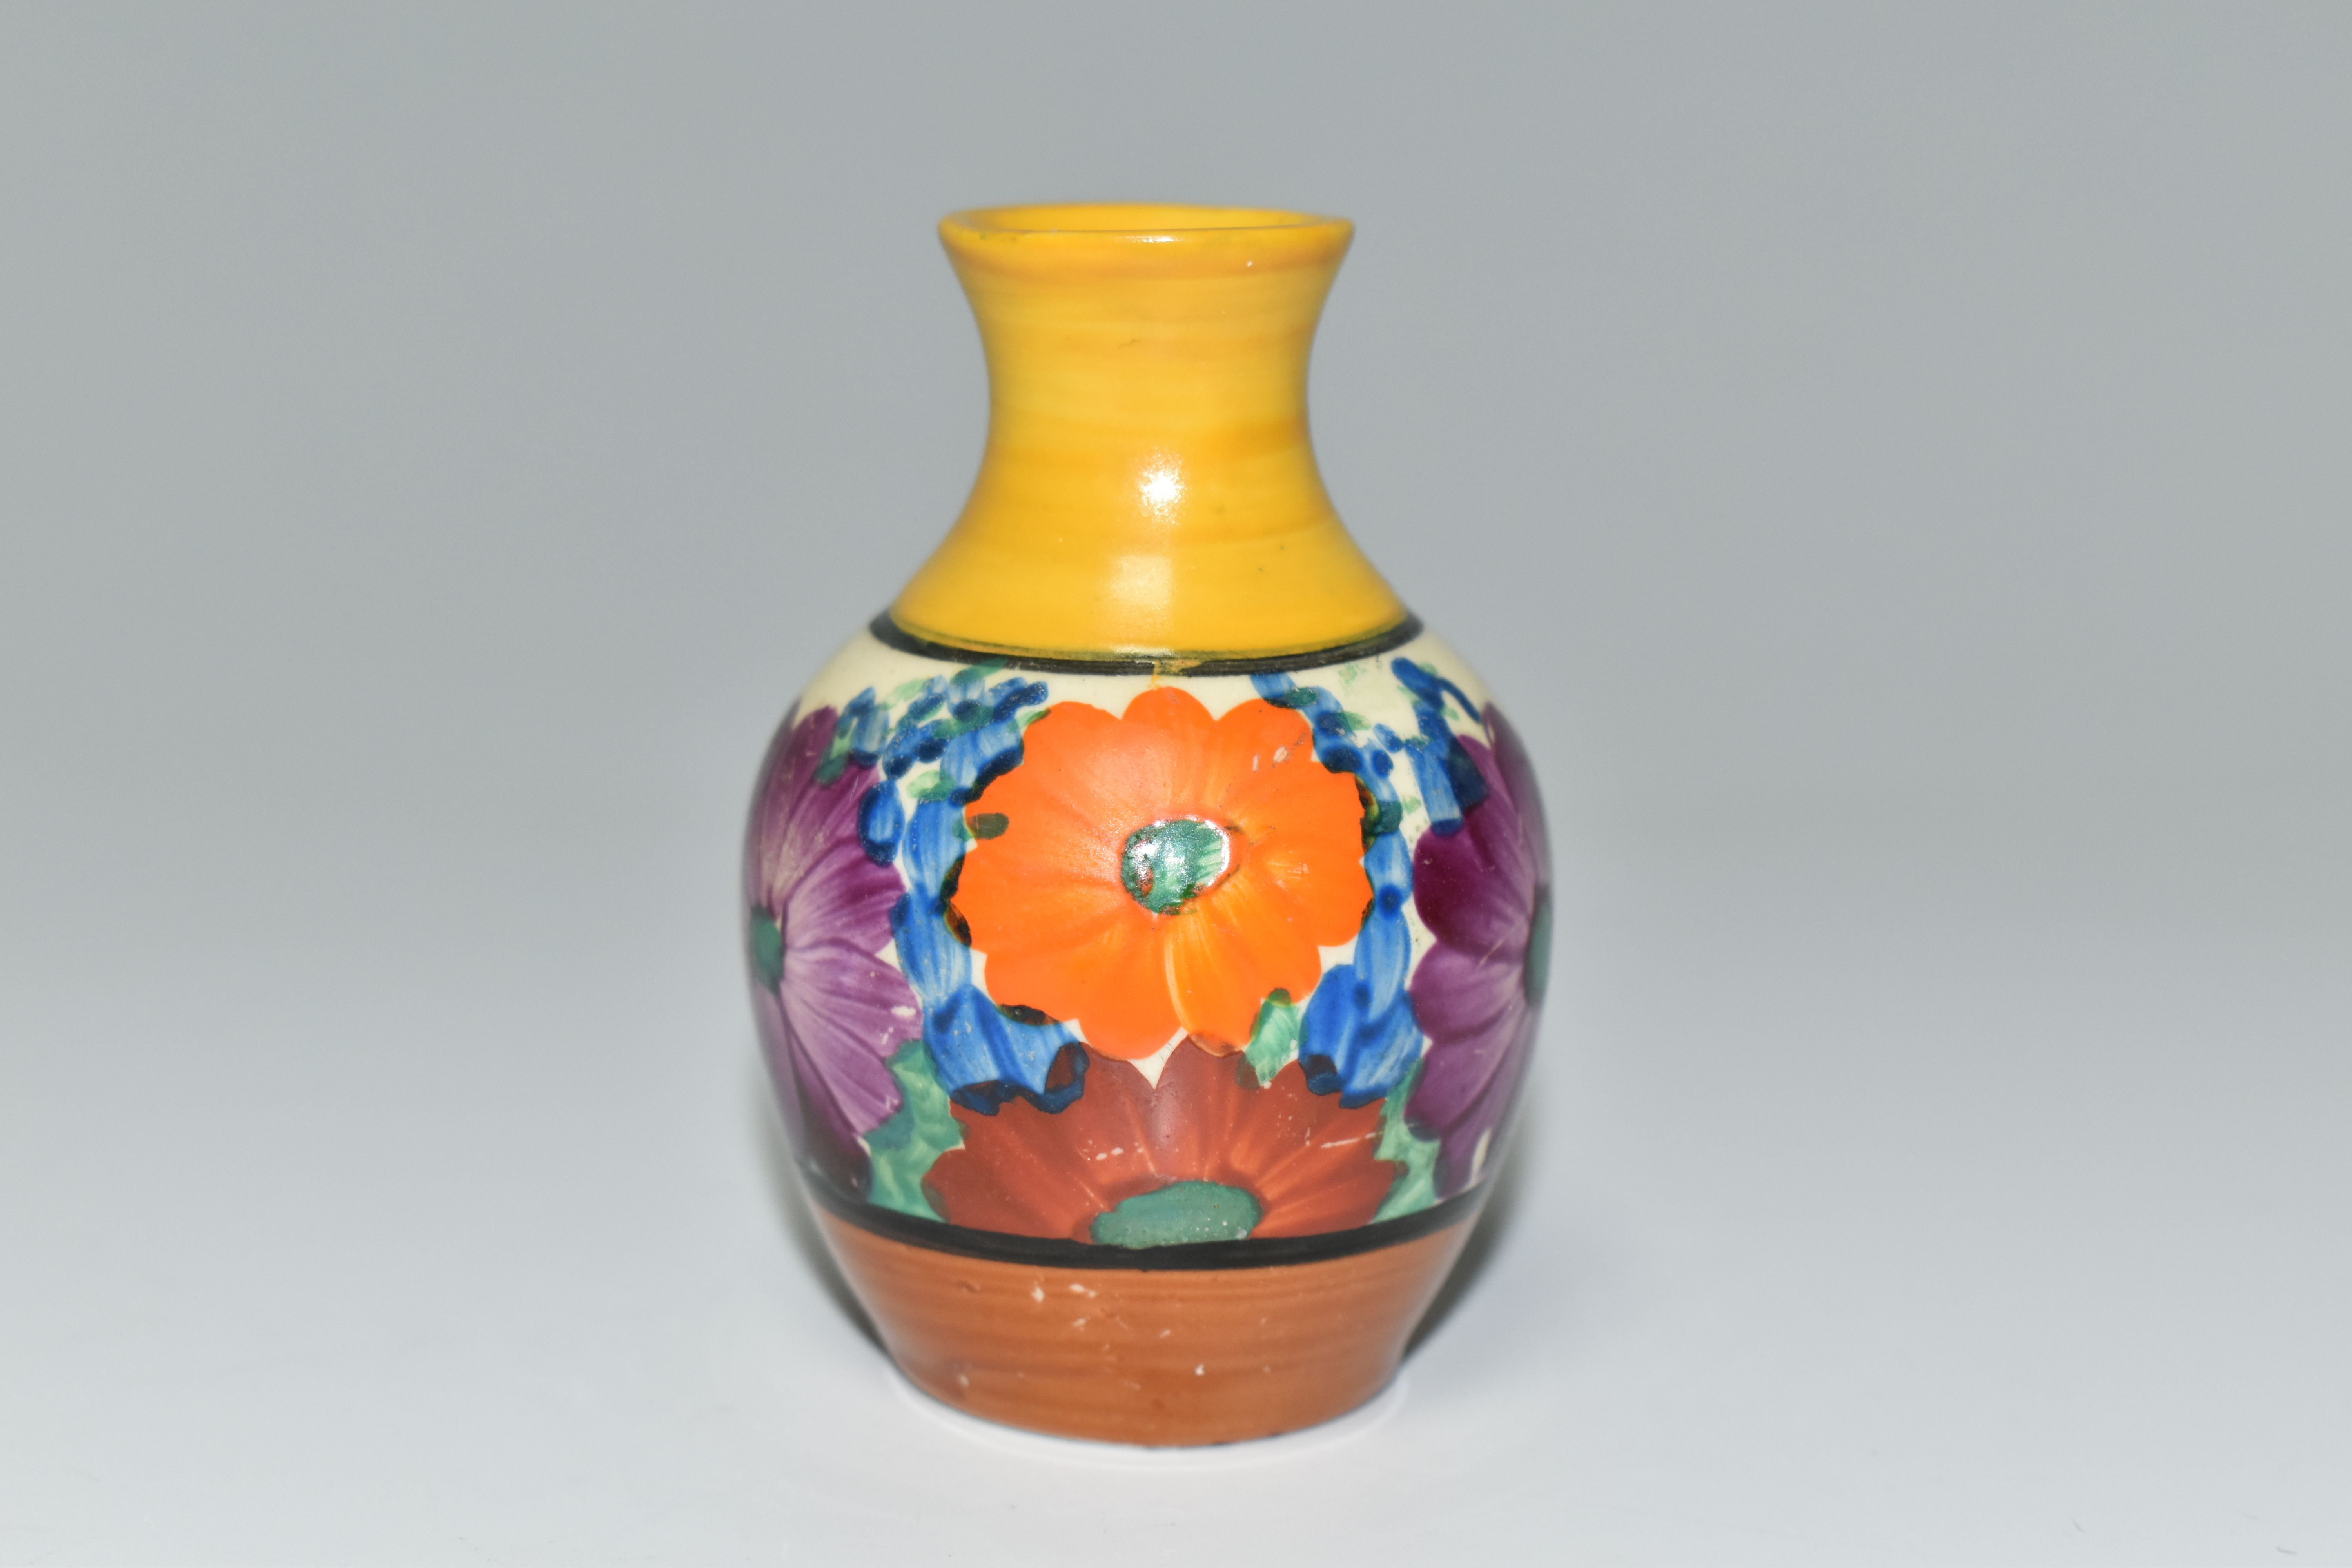 A CLARICE CLIFF MINIATURE VASE, in Gayday pattern, painted with orange, red, blue and purple - Image 2 of 5